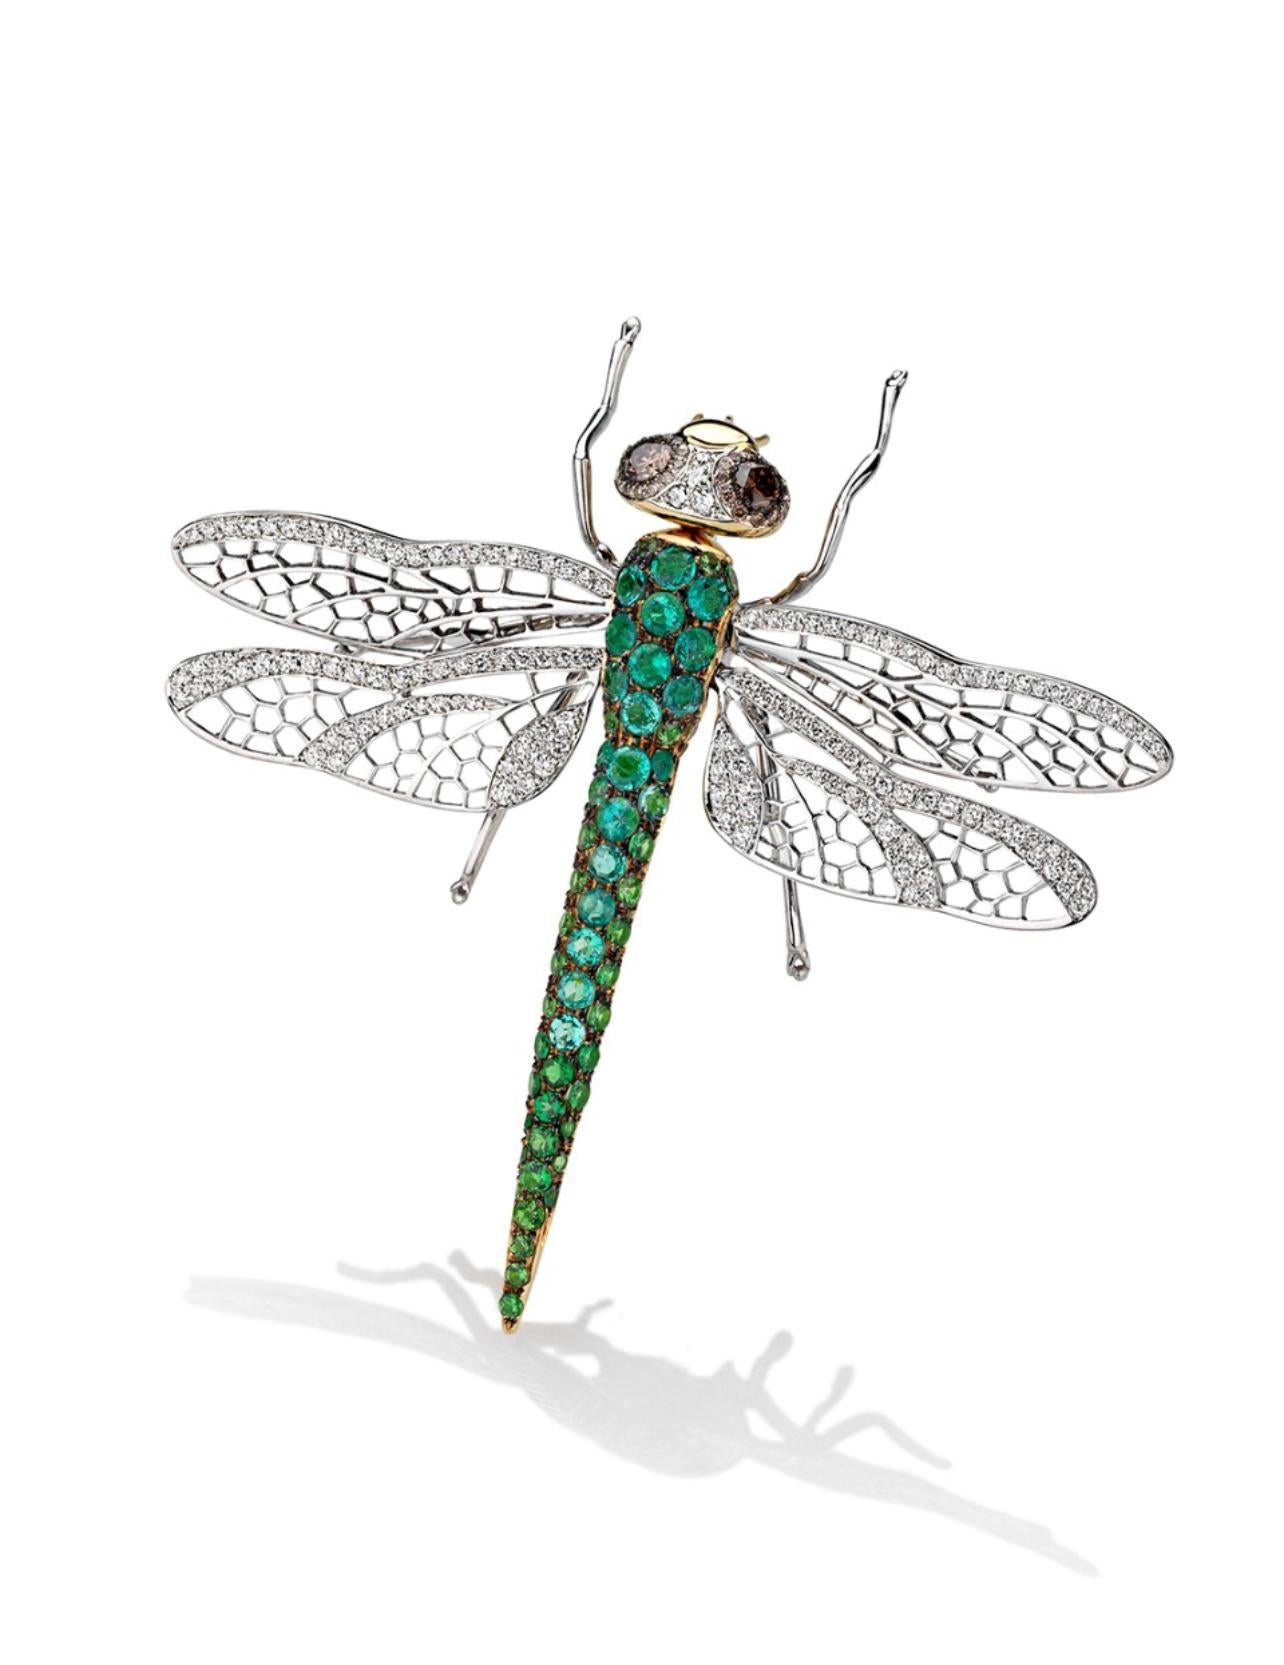 Brooch White Gold 18 K Gianni Lazzaro 

Diamonds 129-.1,74ct.Gvs
Diamond 2-0,40 ct
Emerald 49-10,12ct.

With a heritage of ancient fine Swiss jewelry traditions, NATKINA is a Geneva-based jewelry brand that creates modern jewelry masterpieces